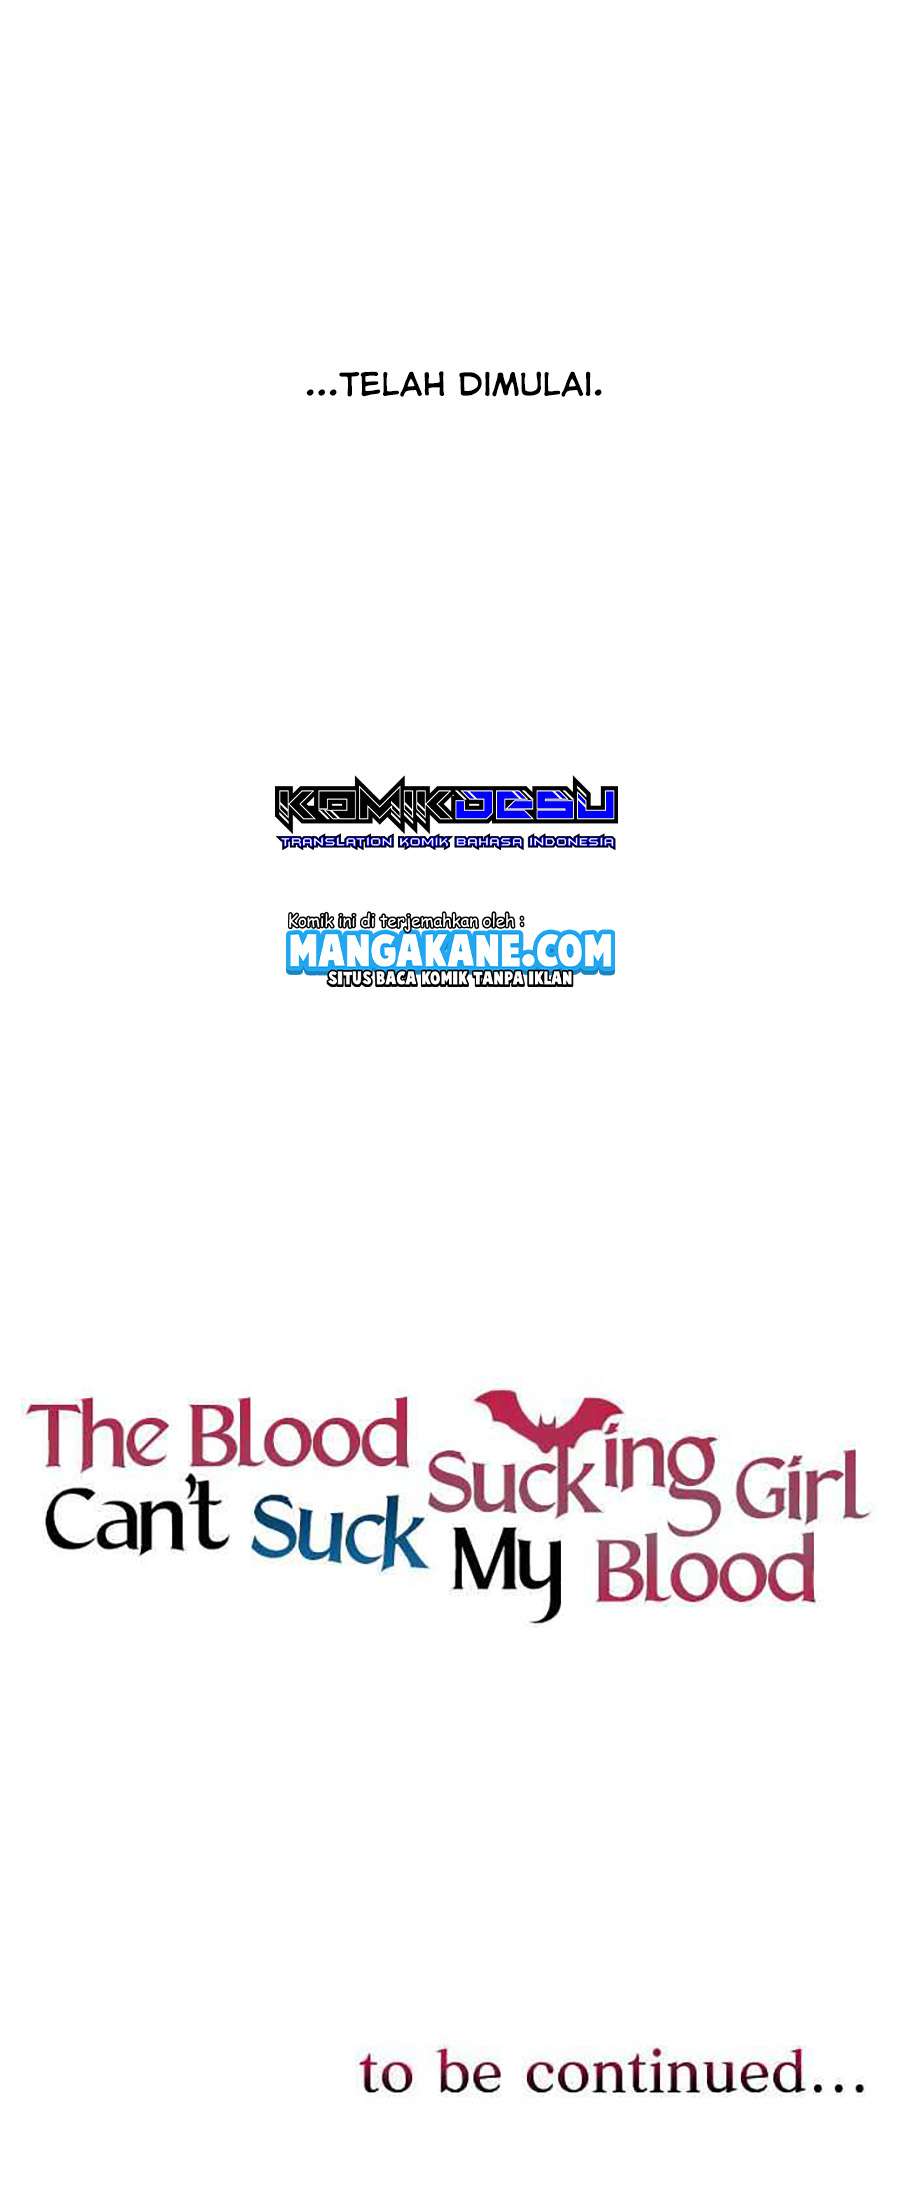 The Blood Sucking Girl Can’t Suck My Blood Chapter 1